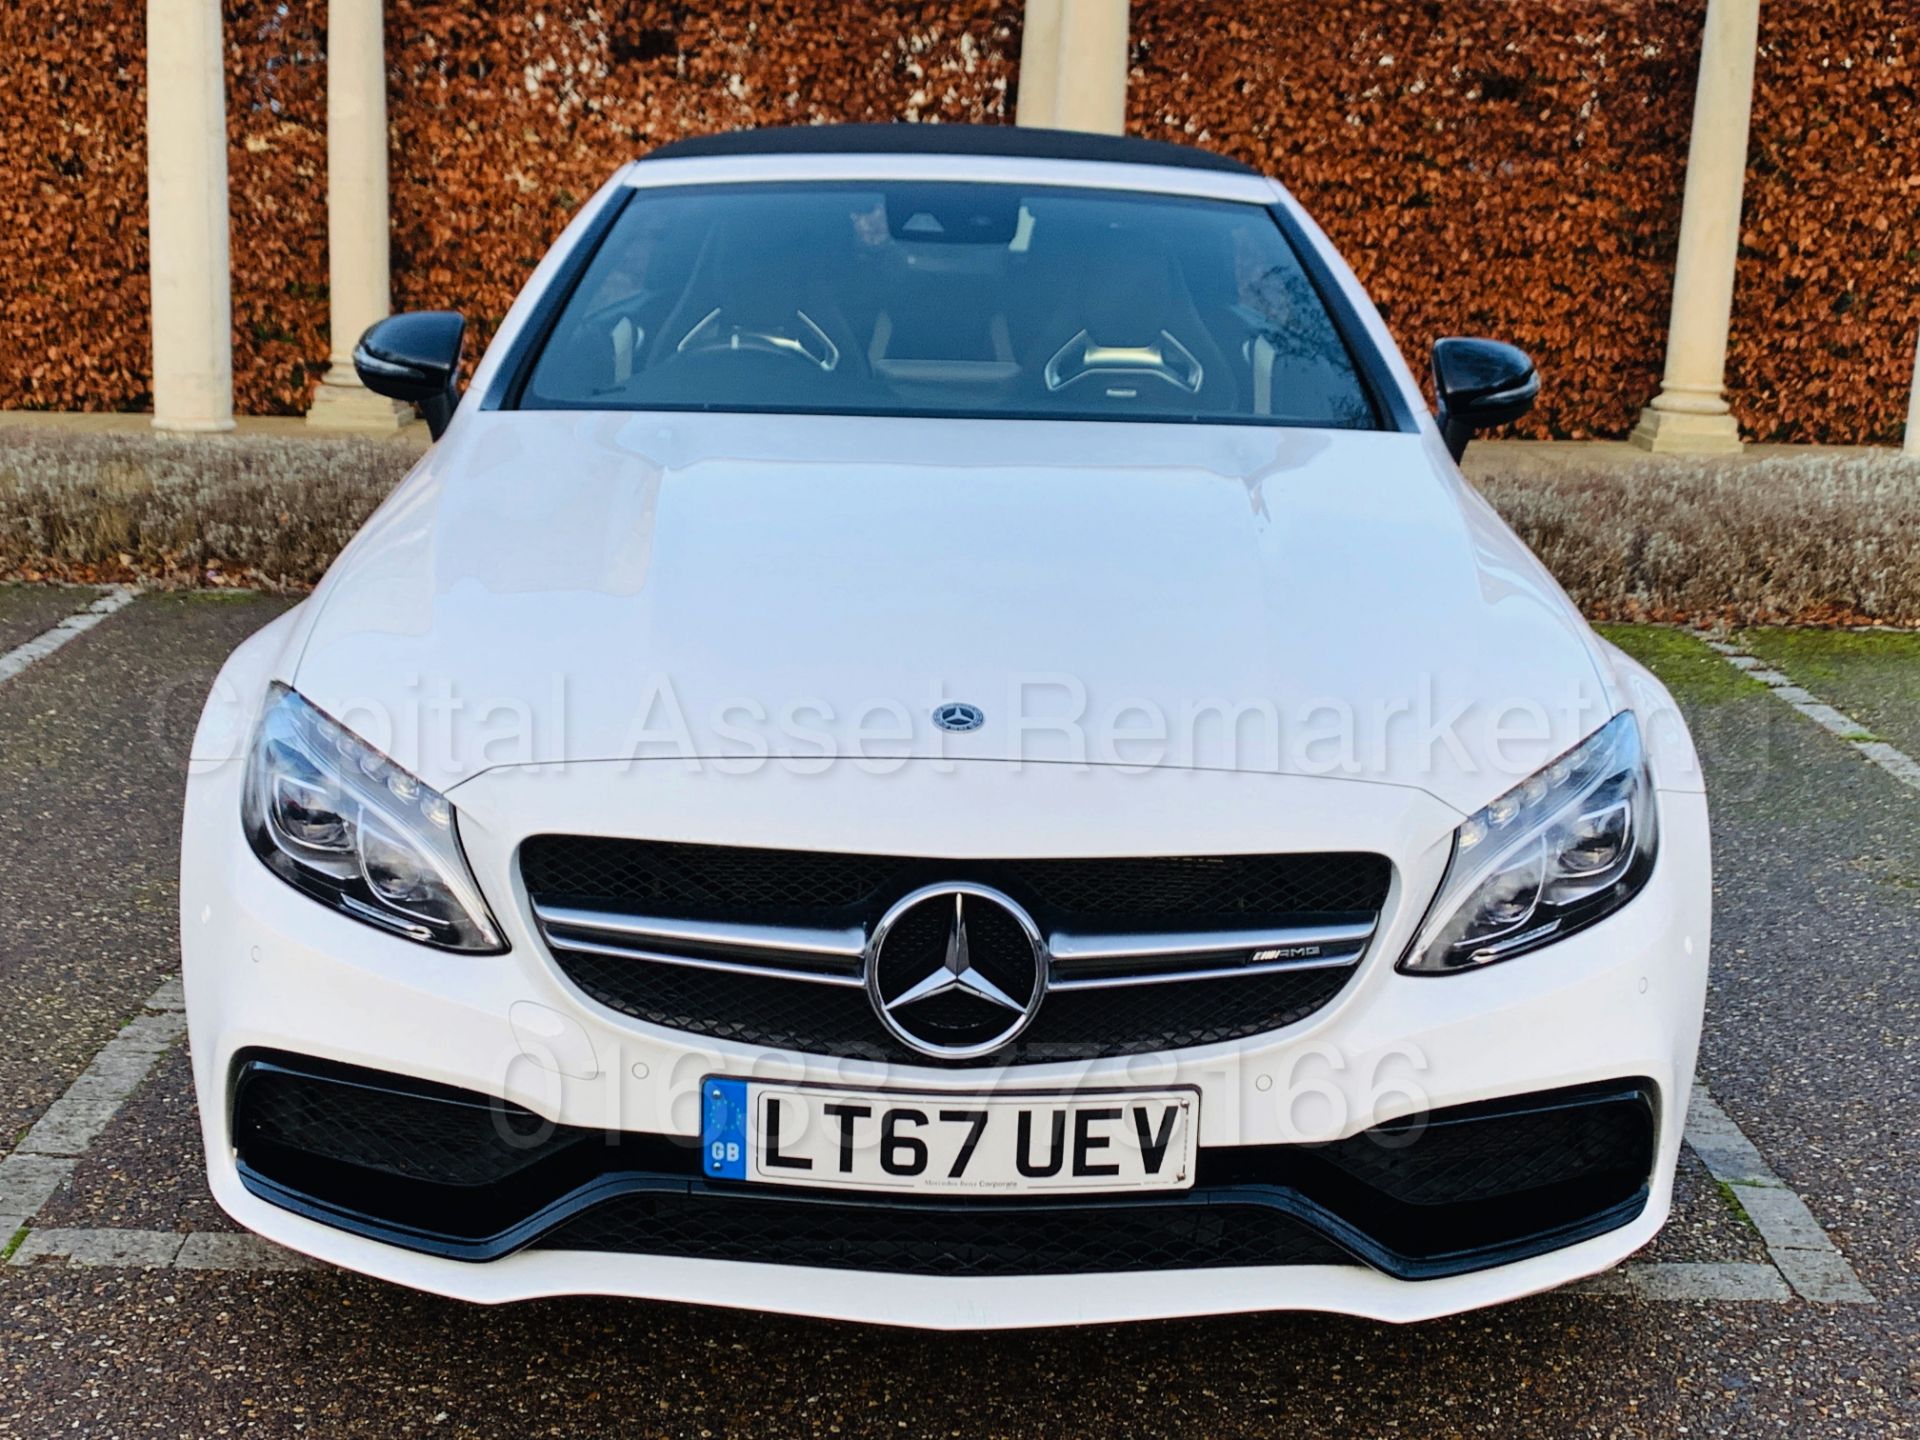 (On Sale) MERCEDES-BENZ AMG C63-S *CABRIOLET* (67 REG) '4.0 BI-TURBO -510 BHP - AUTO' *FULLY LOADED* - Image 8 of 79